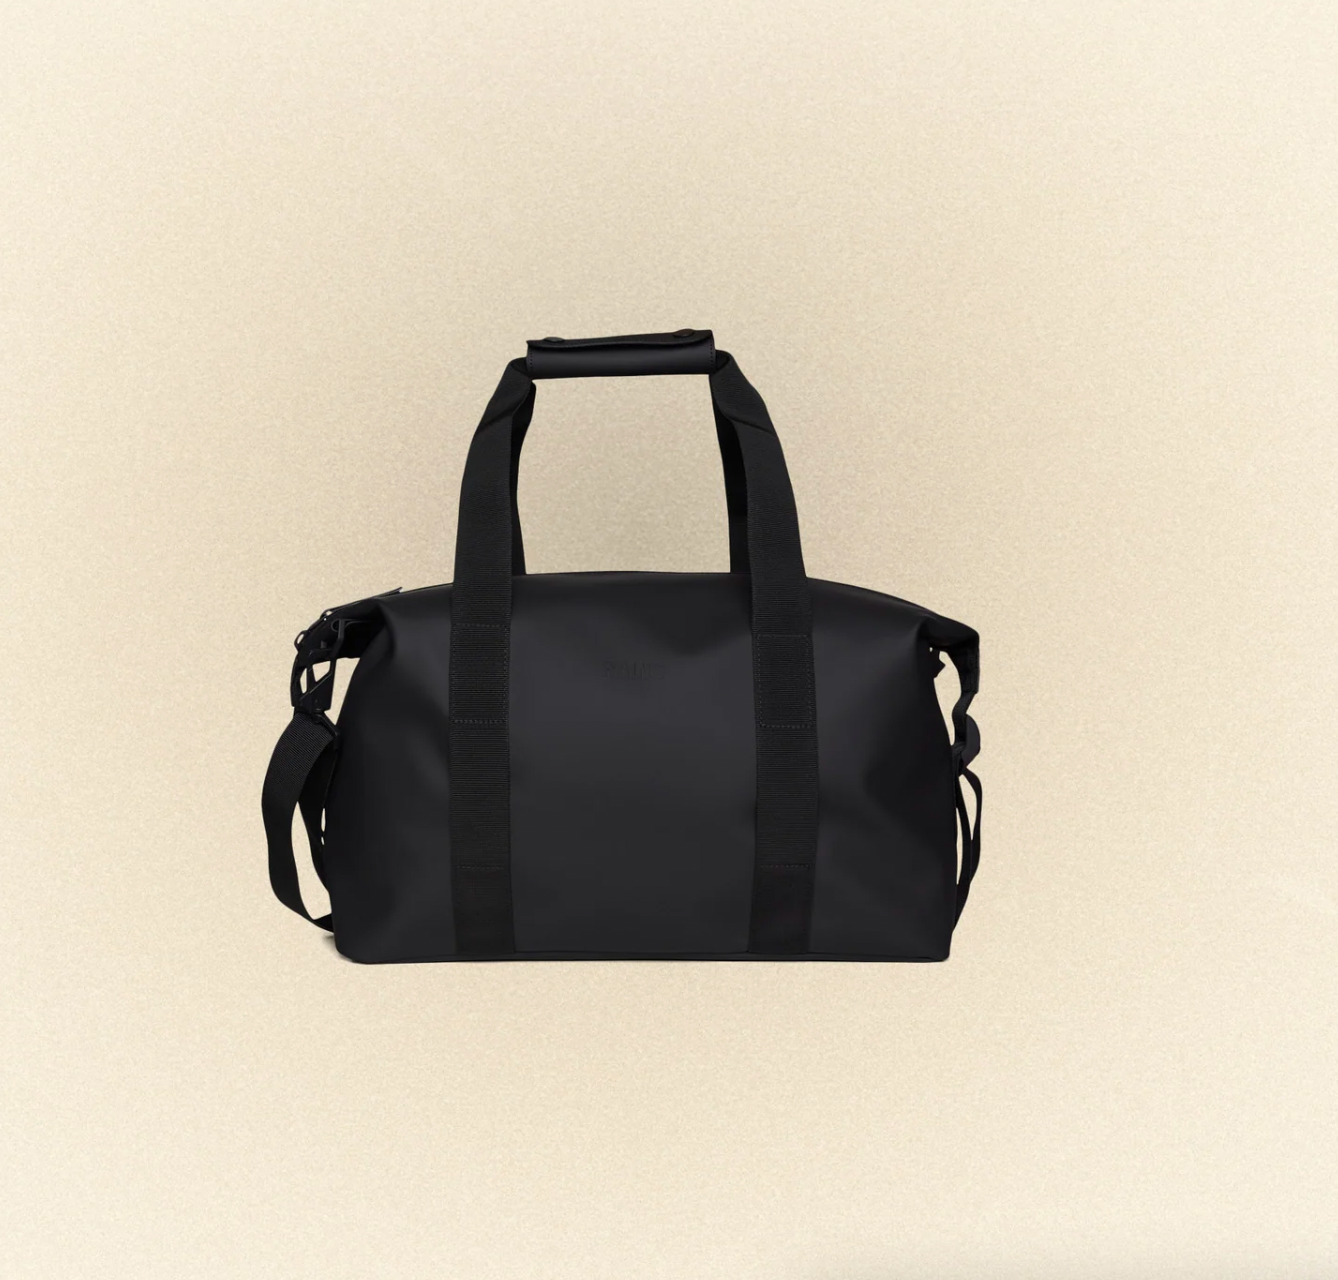 Product Image for Hilo Weekend Bag Small W3, Black